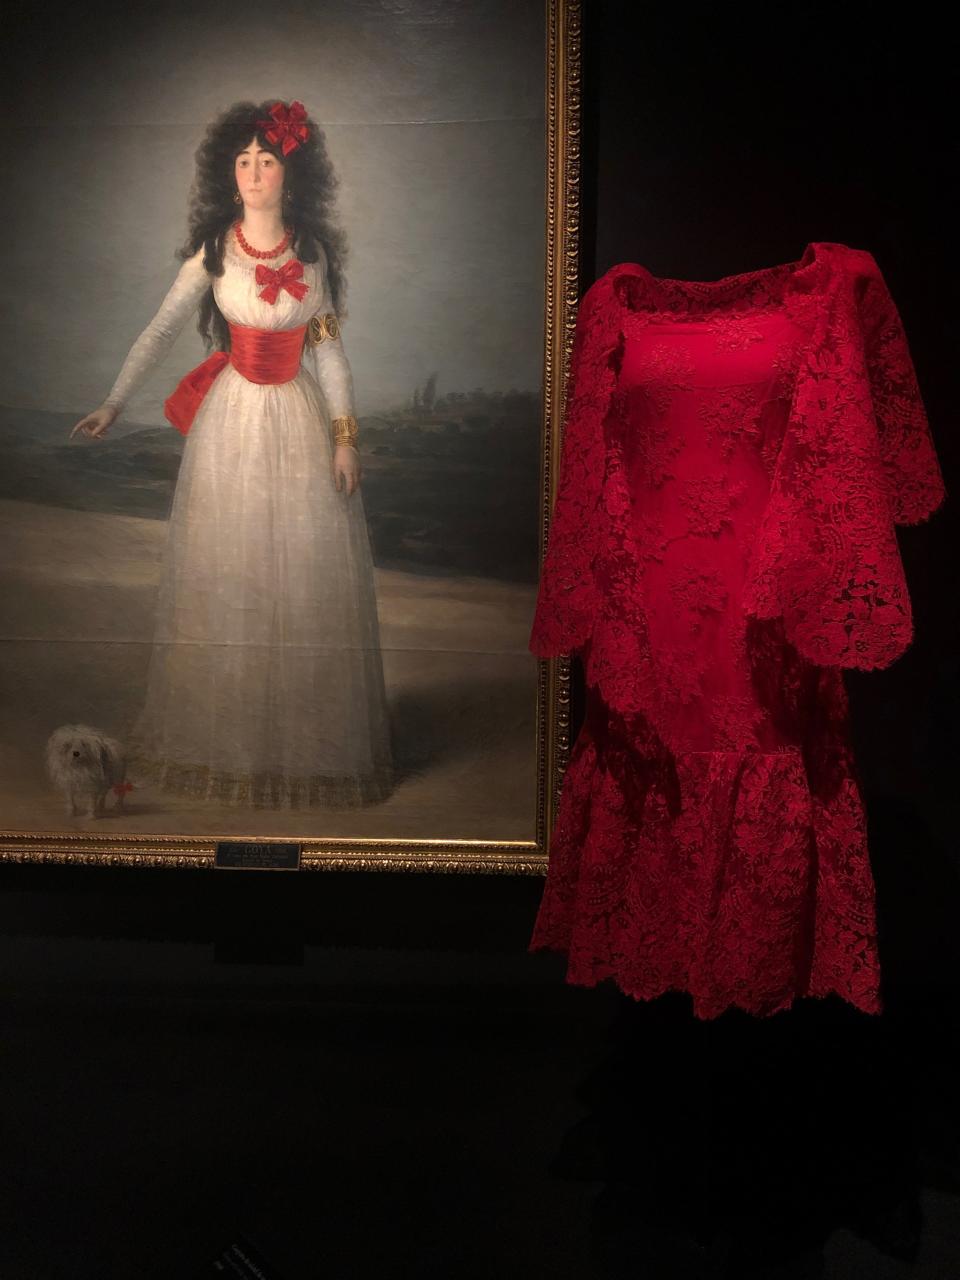 Goya’s The Duchess of Alba in White, 1795, with my shift dress from 1960.